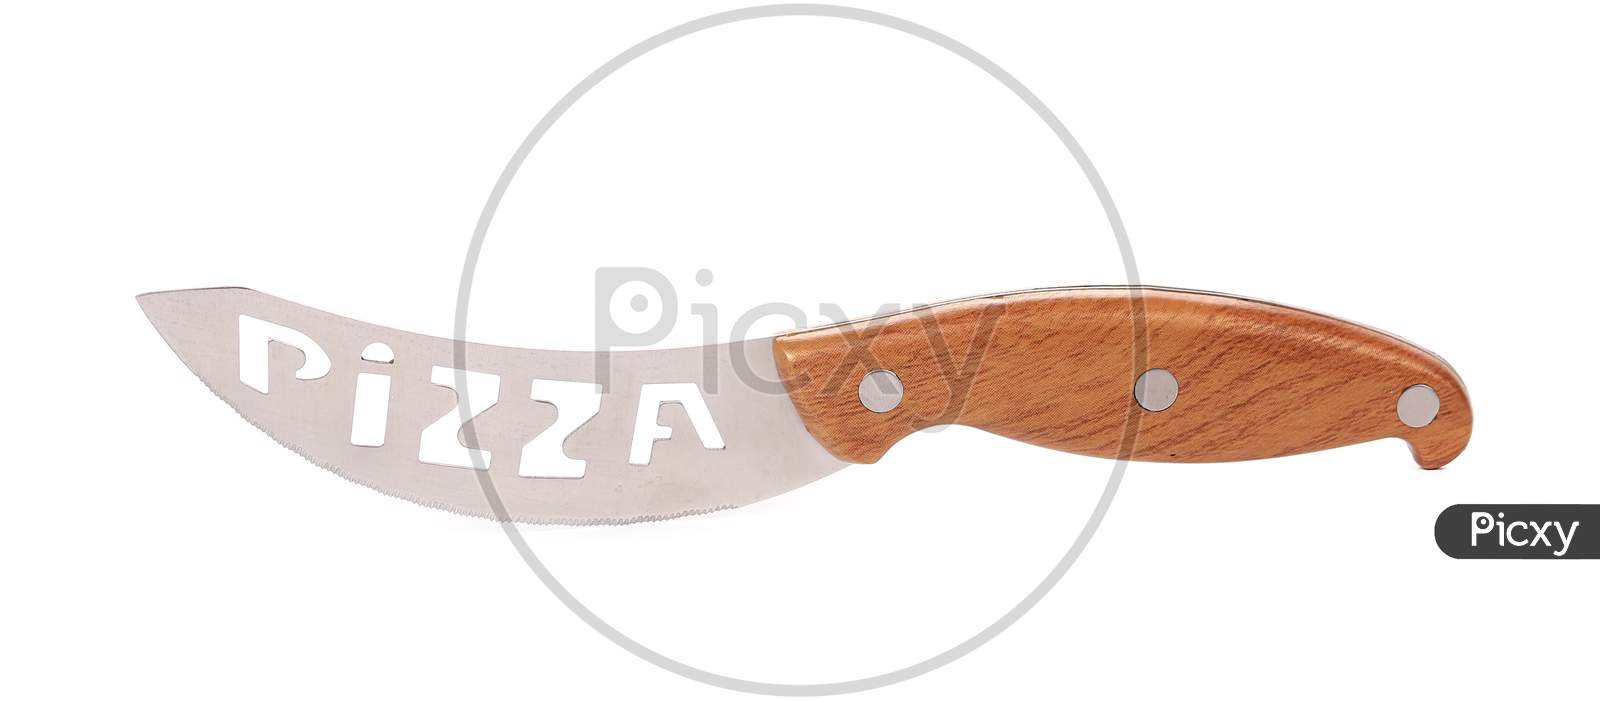 Knife For Cutting Pizza. Isolated On A White Background.